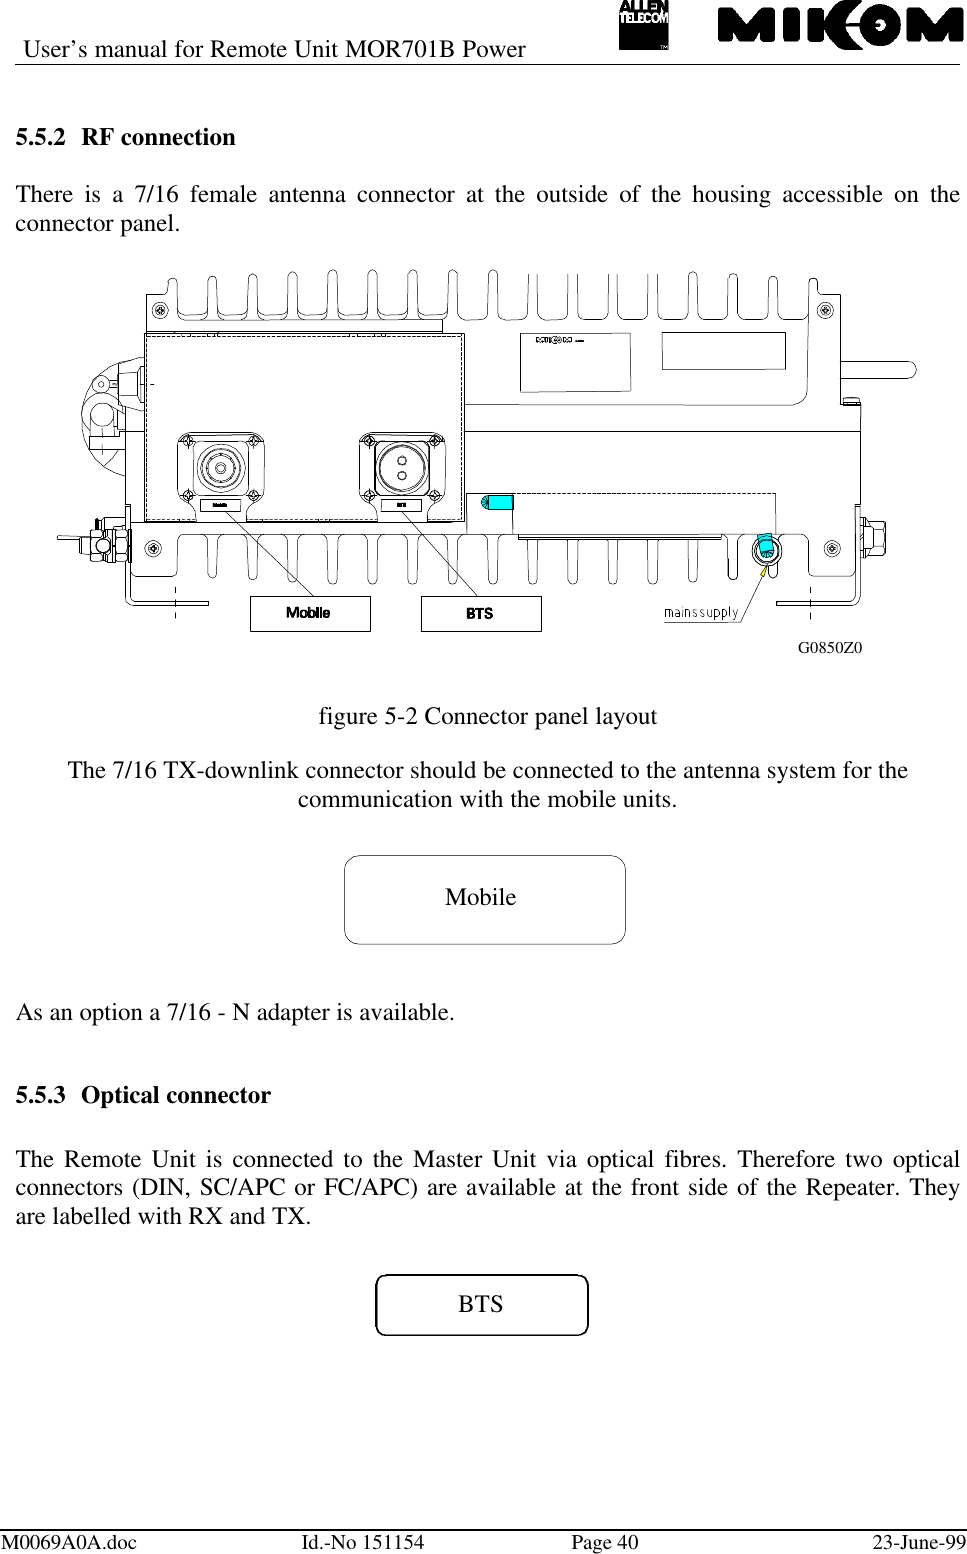 User’s manual for Remote Unit MOR701B PowerM0069A0A.doc Id.-No 151154 Page 40 23-June-995.5.2 RF connectionThere is a 7/16 female antenna connector at the outside of the housing accessible on theconnector panel.figure 5-2 Connector panel layoutThe 7/16 TX-downlink connector should be connected to the antenna system for thecommunication with the mobile units.MobileAs an option a 7/16 - N adapter is available.5.5.3 Optical connectorThe Remote Unit is connected to the Master Unit via optical fibres. Therefore two opticalconnectors (DIN, SC/APC or FC/APC) are available at the front side of the Repeater. Theyare labelled with RX and TX.BTSG0850Z0